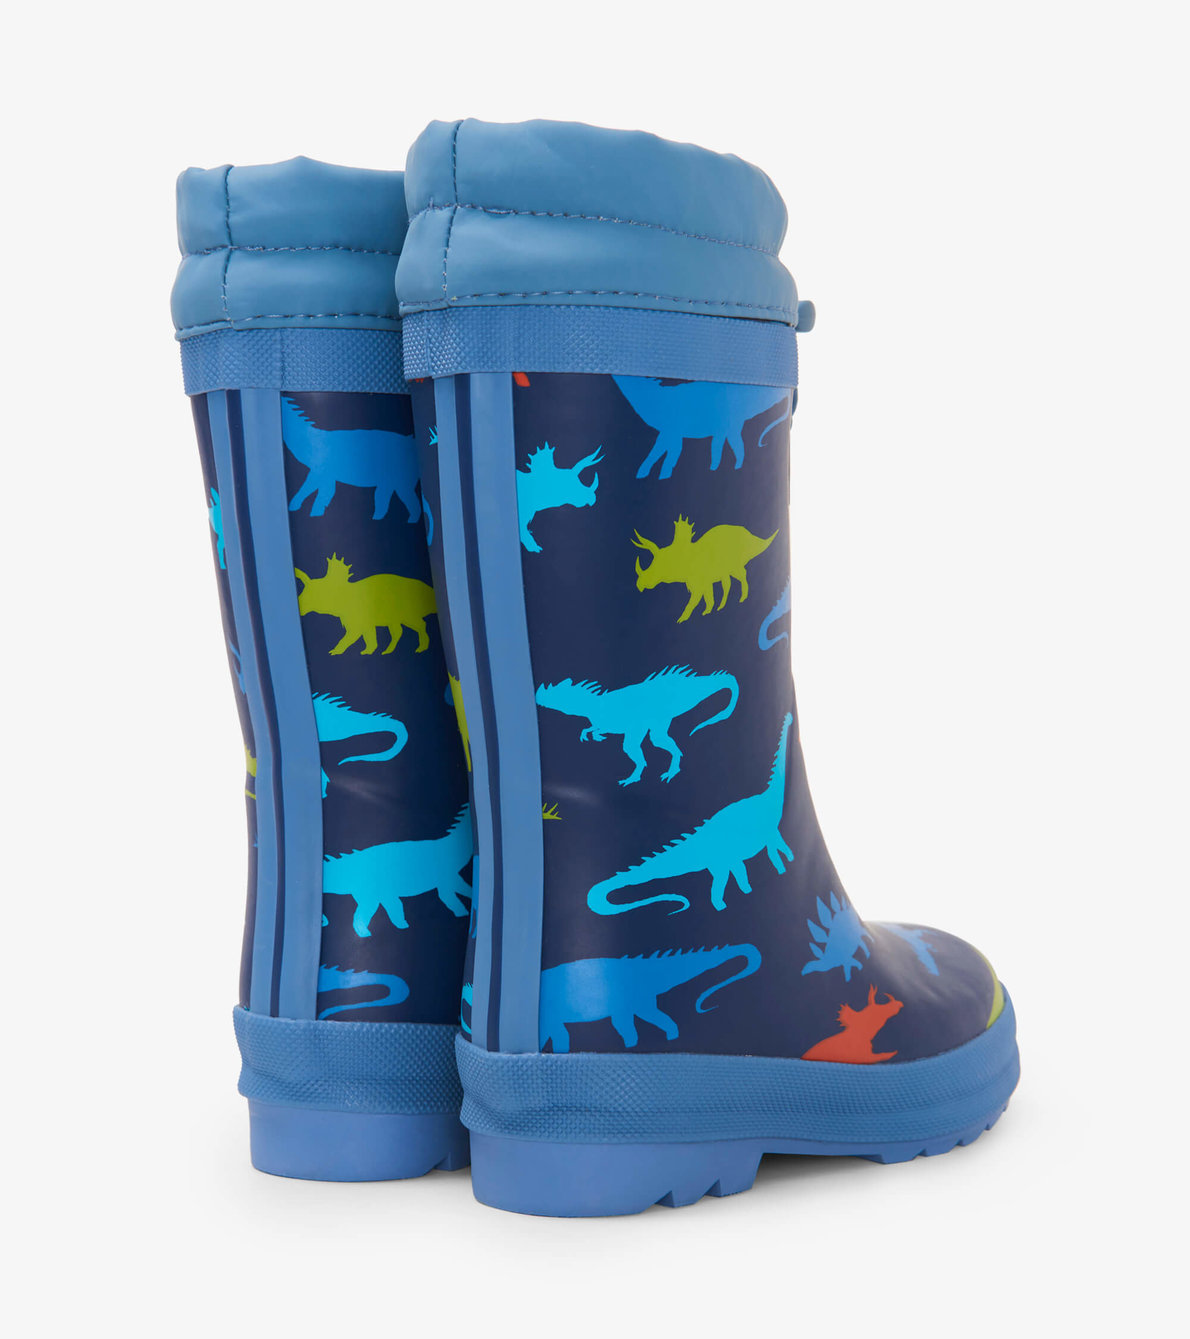 View larger image of Dinosaur Silhouettes Sherpa Lined Kids Wellies